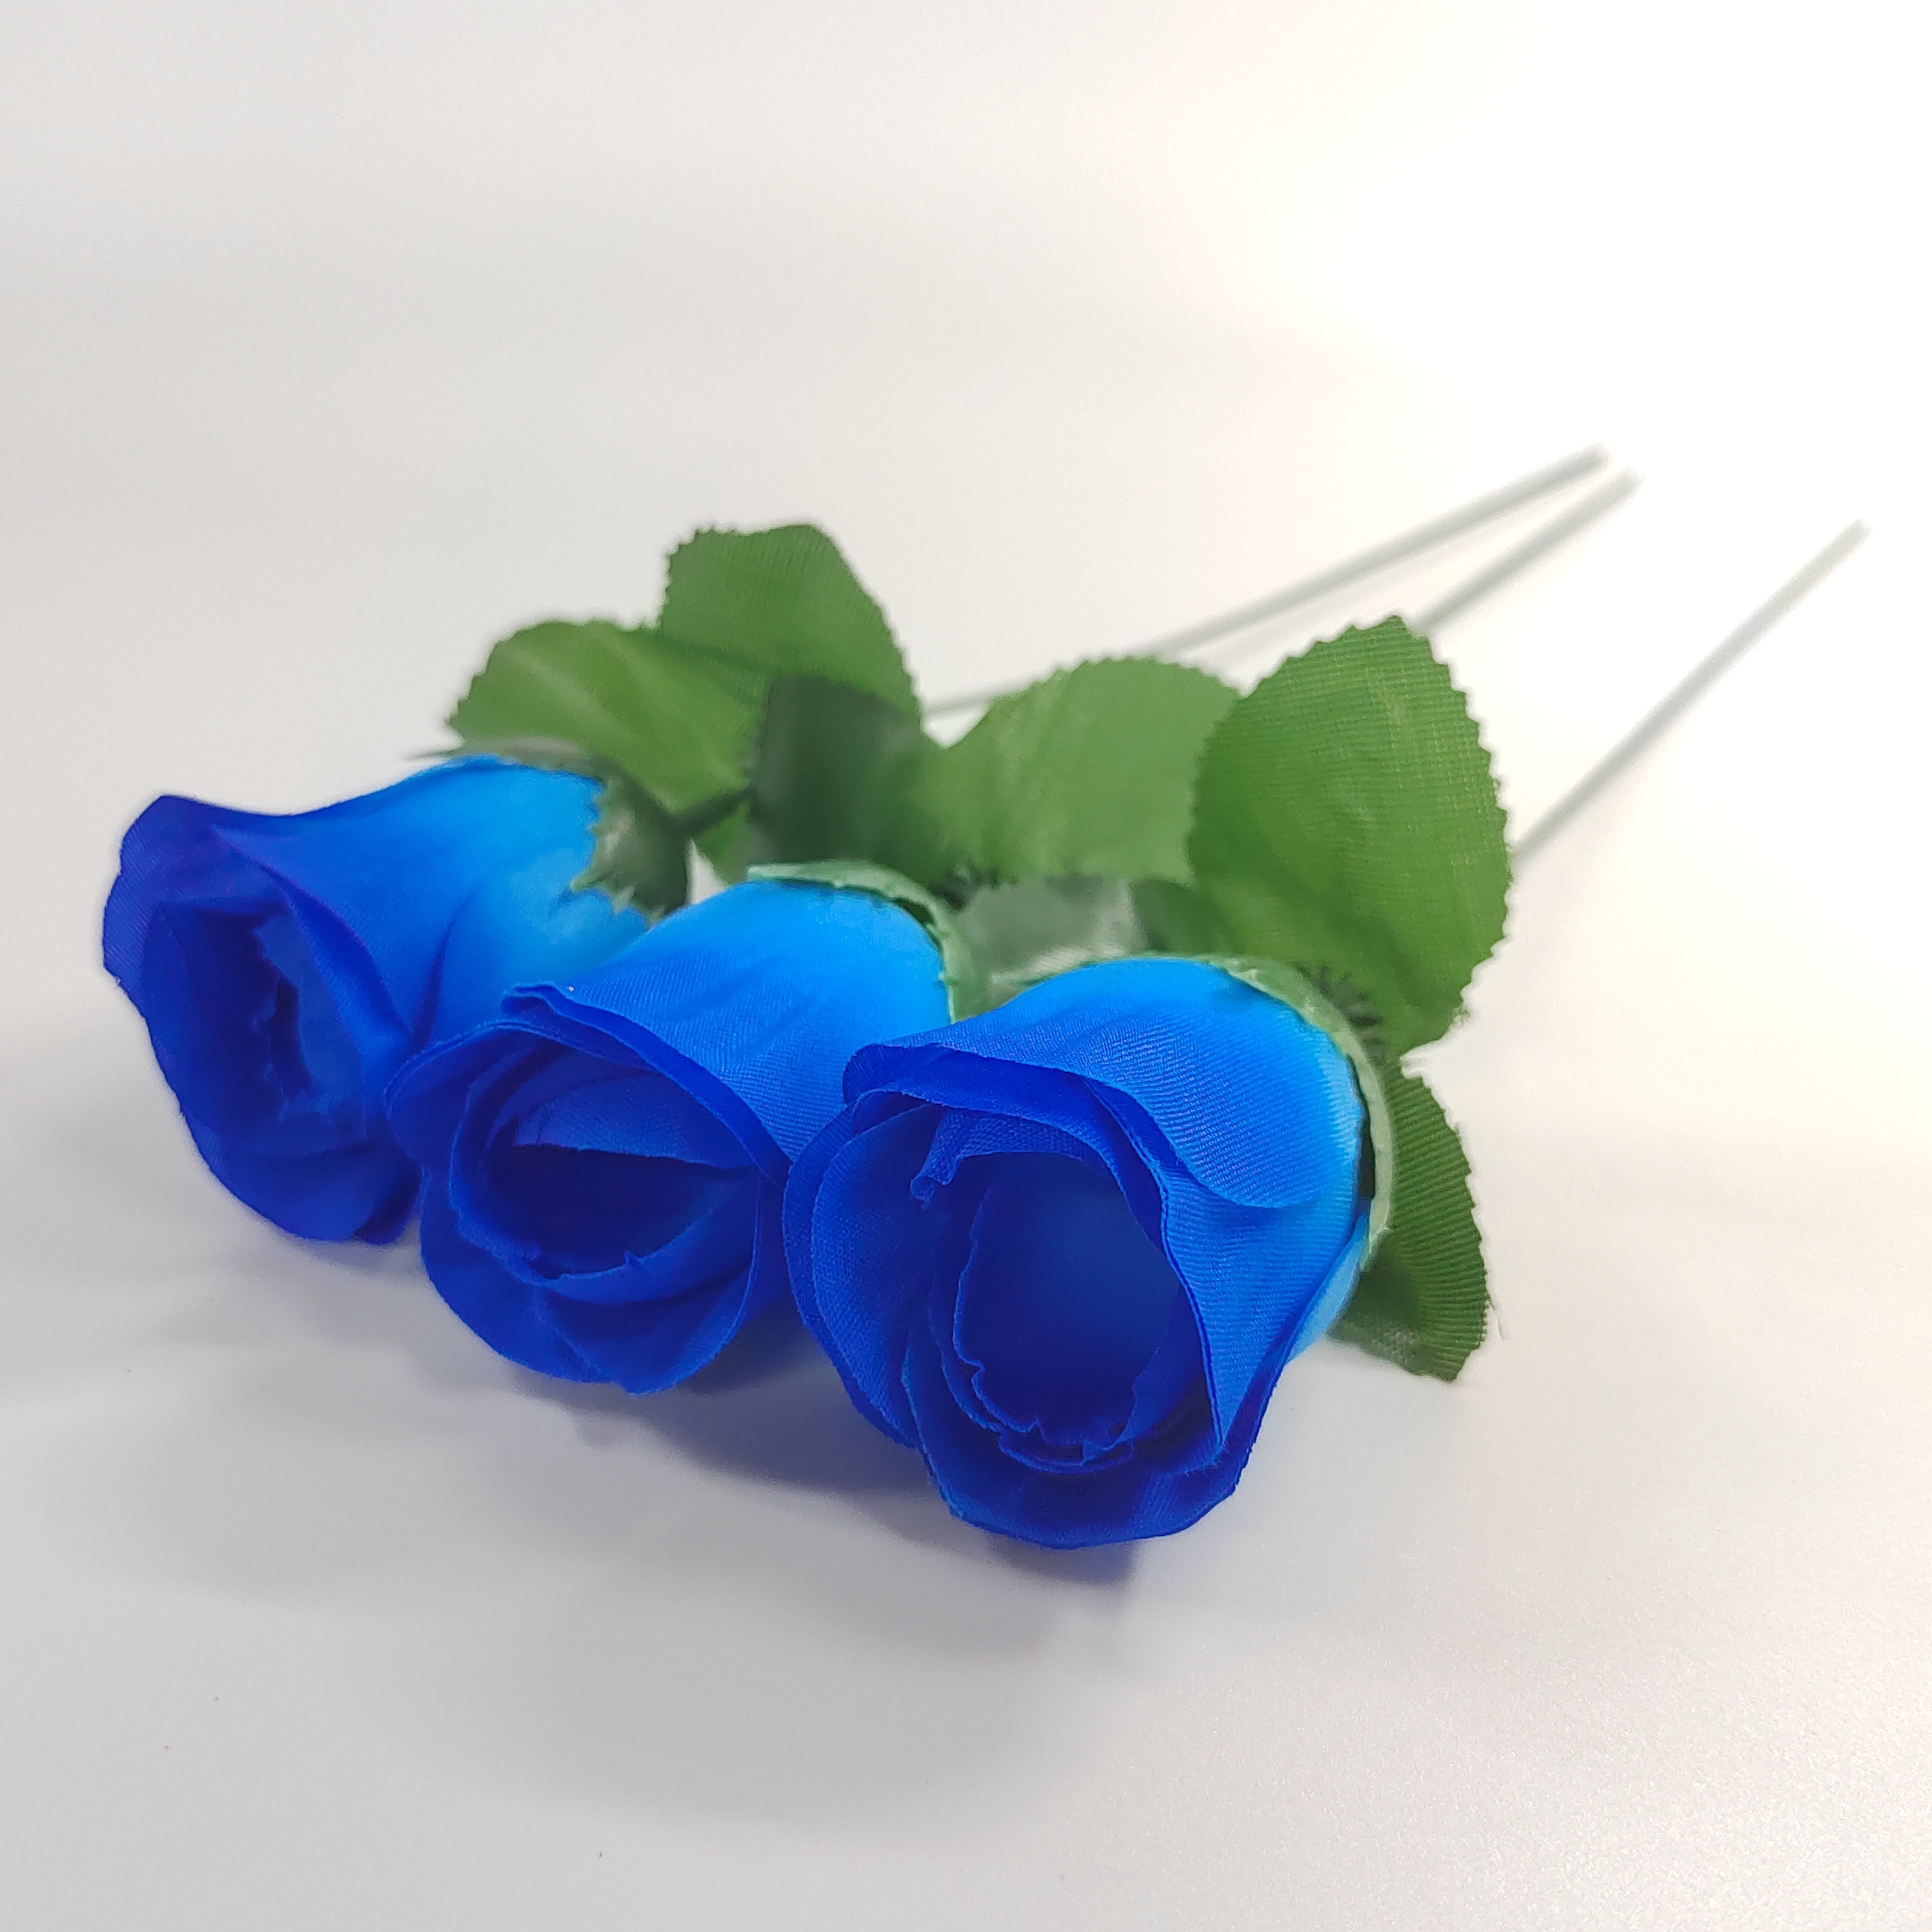 Box of 100: Artificial Rose Flower Picks, 8 Long, 3 Wide, Royal Blue, Floral  Picks, Crafting Supplies, Parties & Events, Home & Office Decor